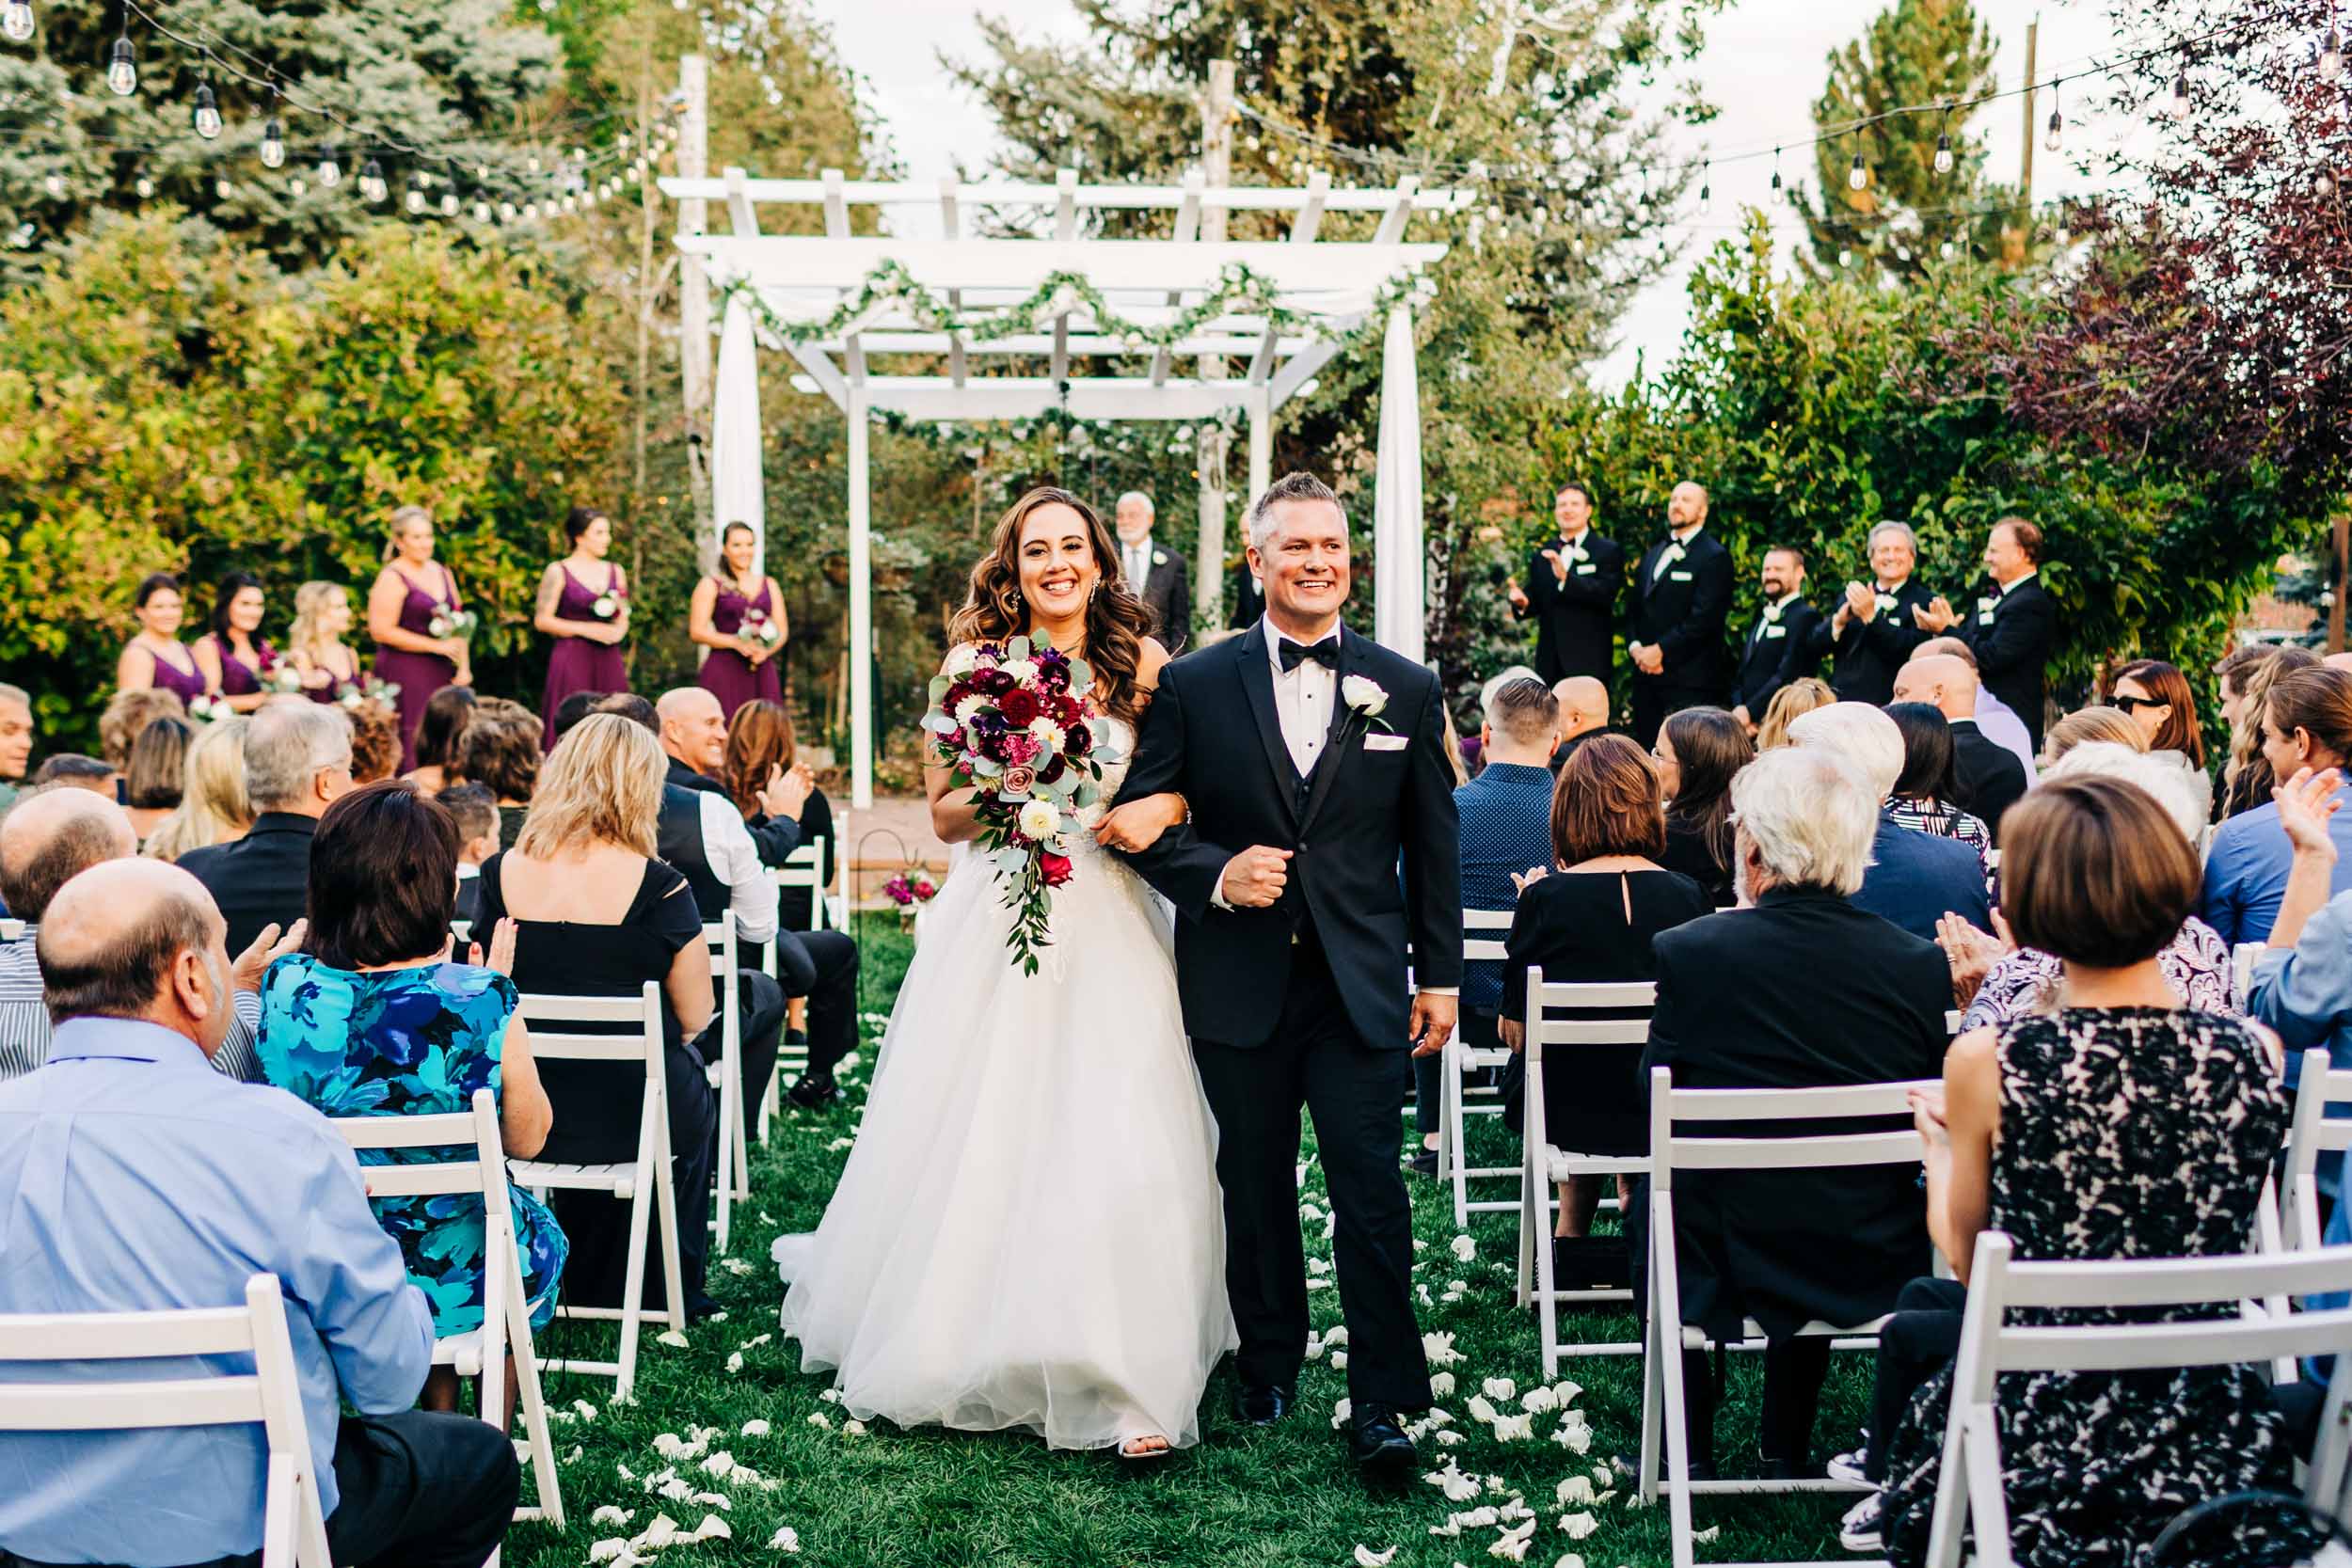 wedding recessional image at church ranch event center